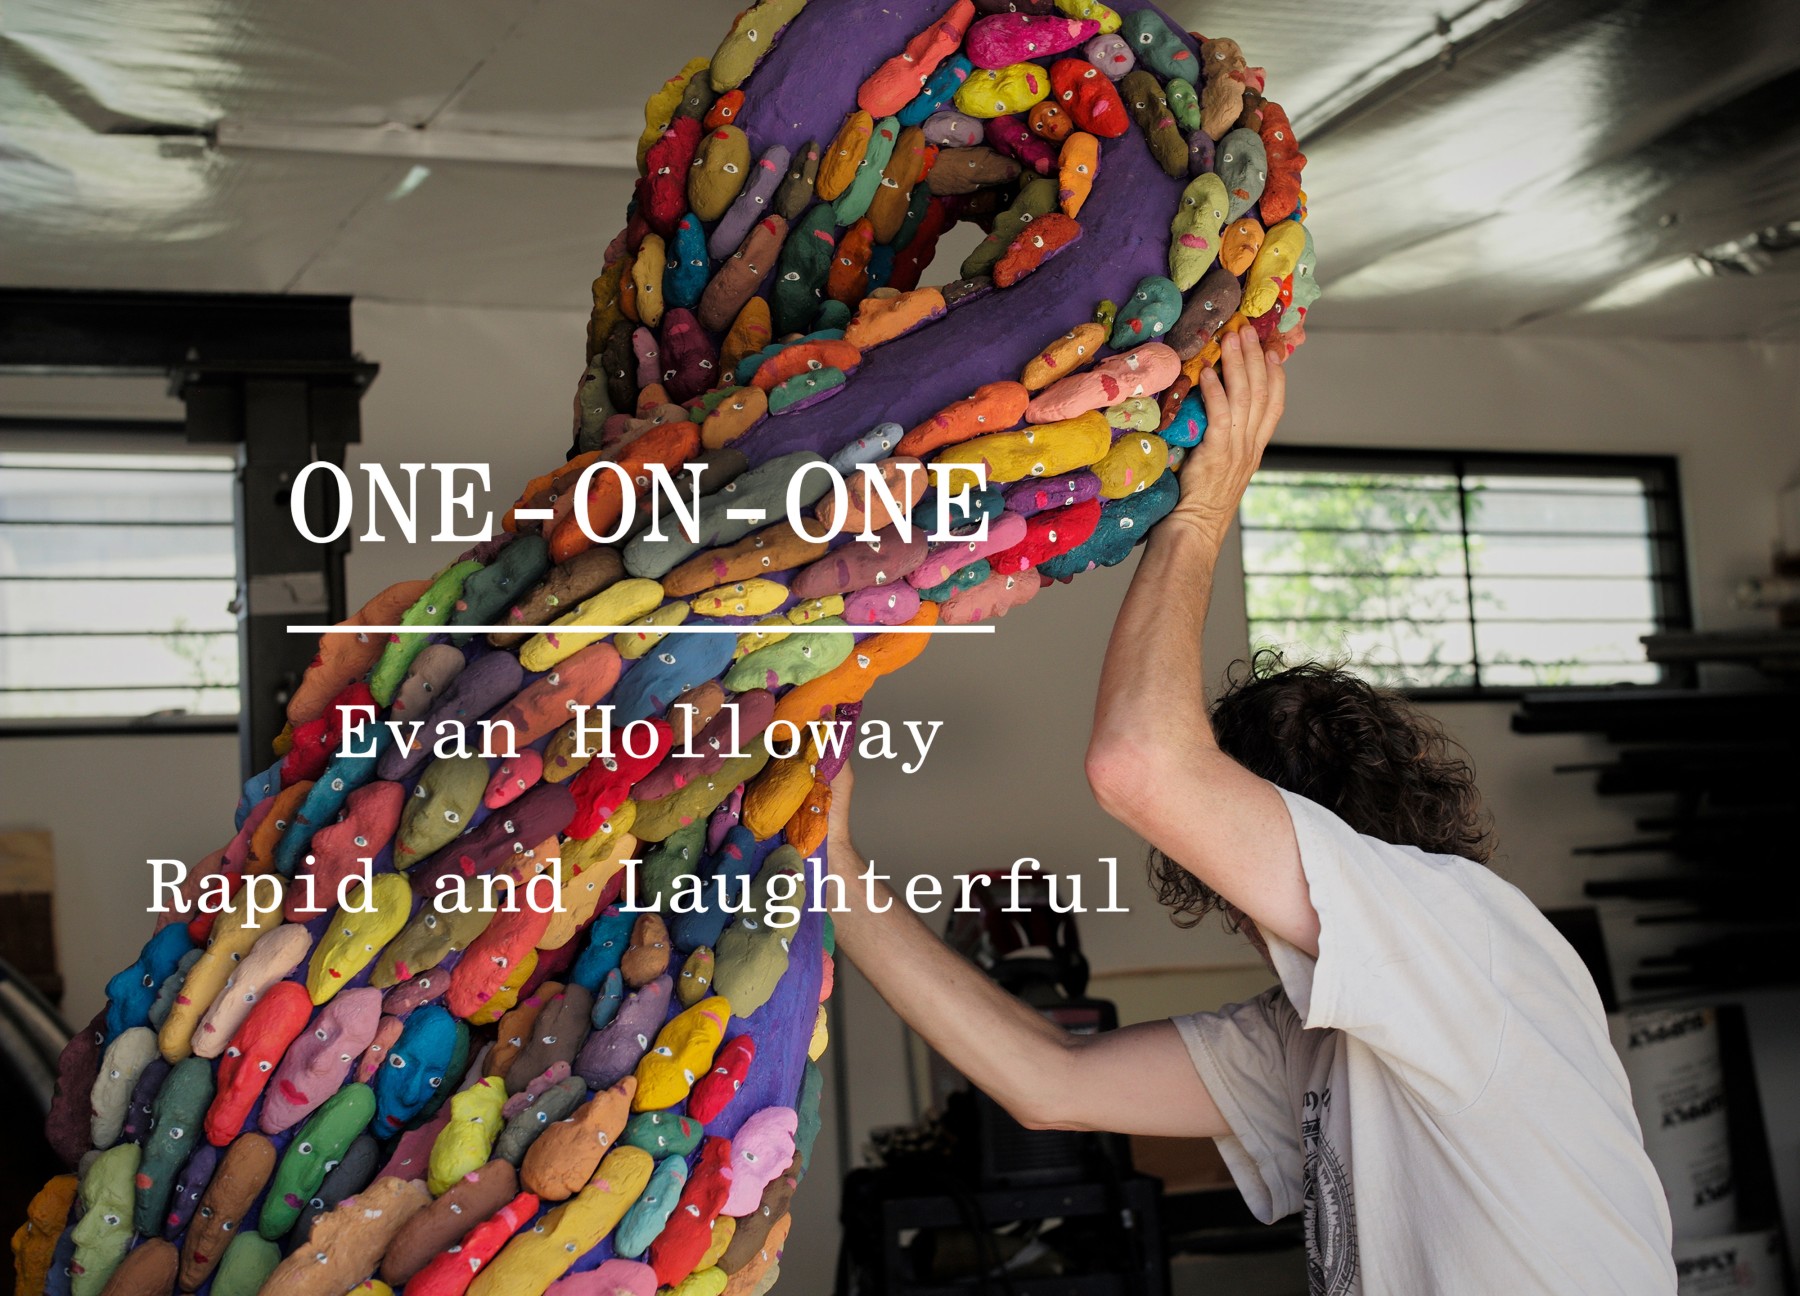 One-on-One: Evan Holloway - Rapid and Laughterful - Viewing Room - David Kordansky Gallery